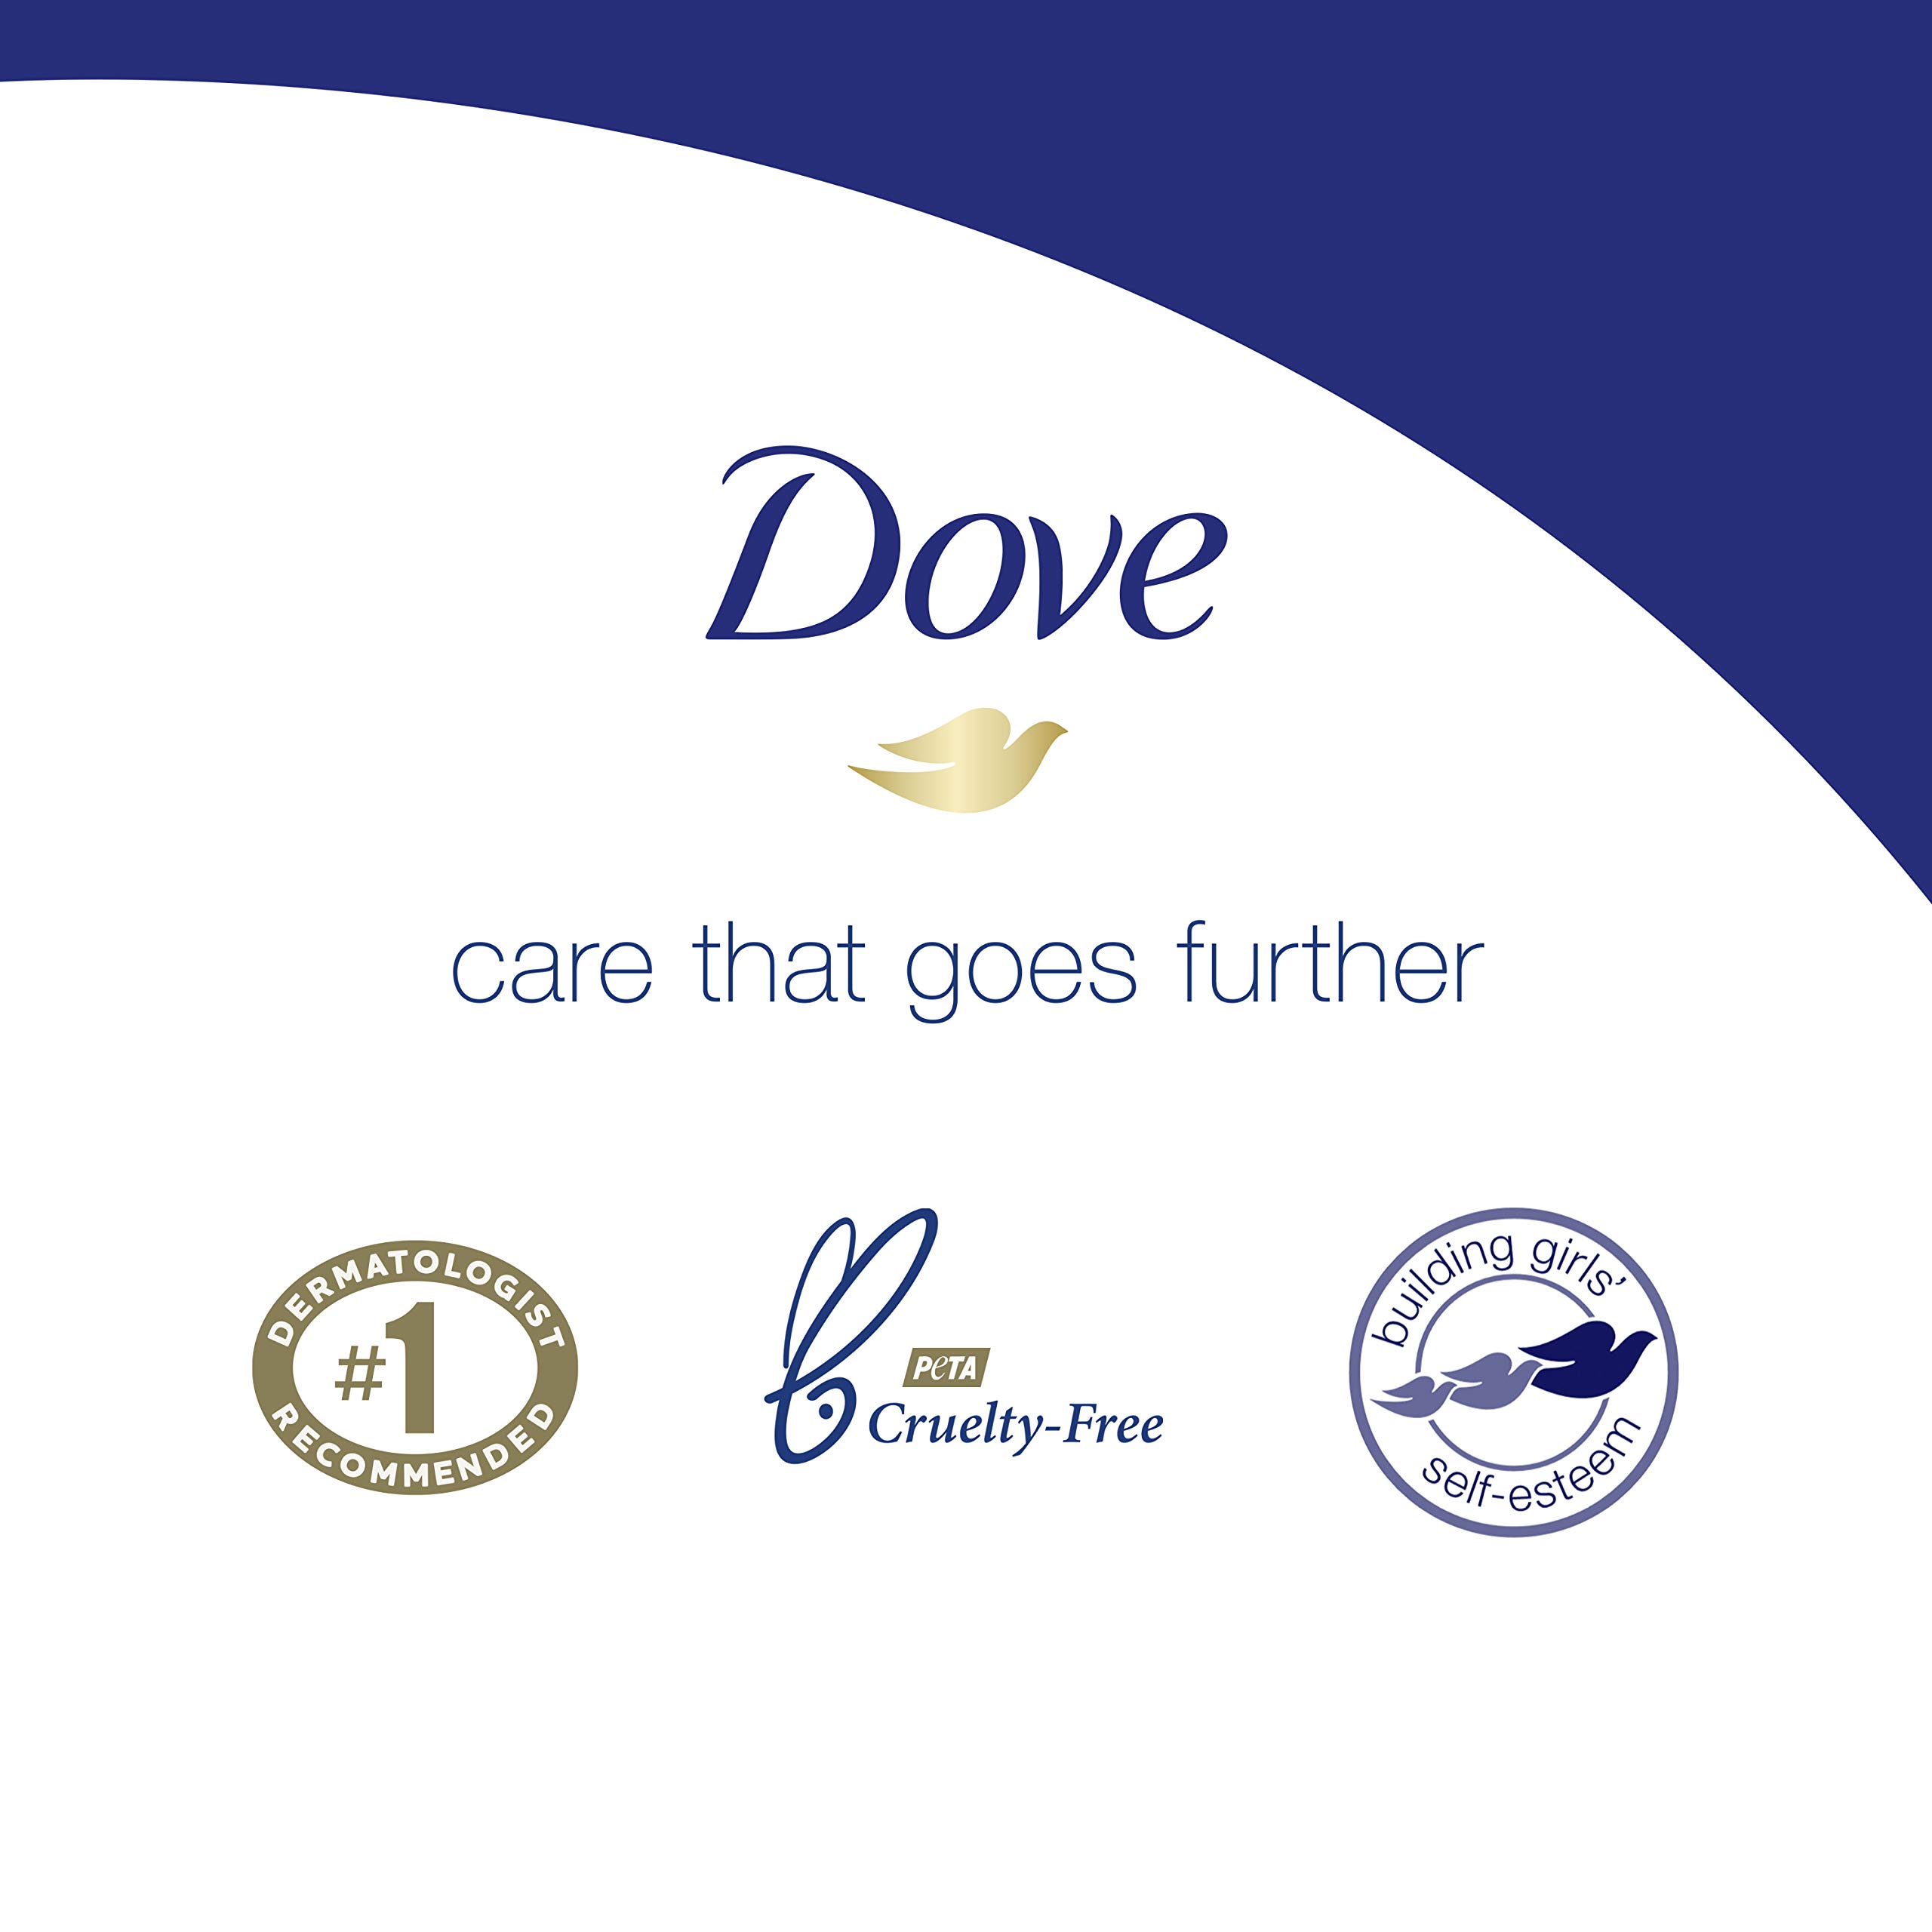 Dove Beauty Bar Gentle Cleanser gor Softer and Smoother Skin with 1/4 Moisturizing Cream White Effectively Washes Away Bacteria, Nourishes Your Skin, 3.75 Ounce (Pack of 2)